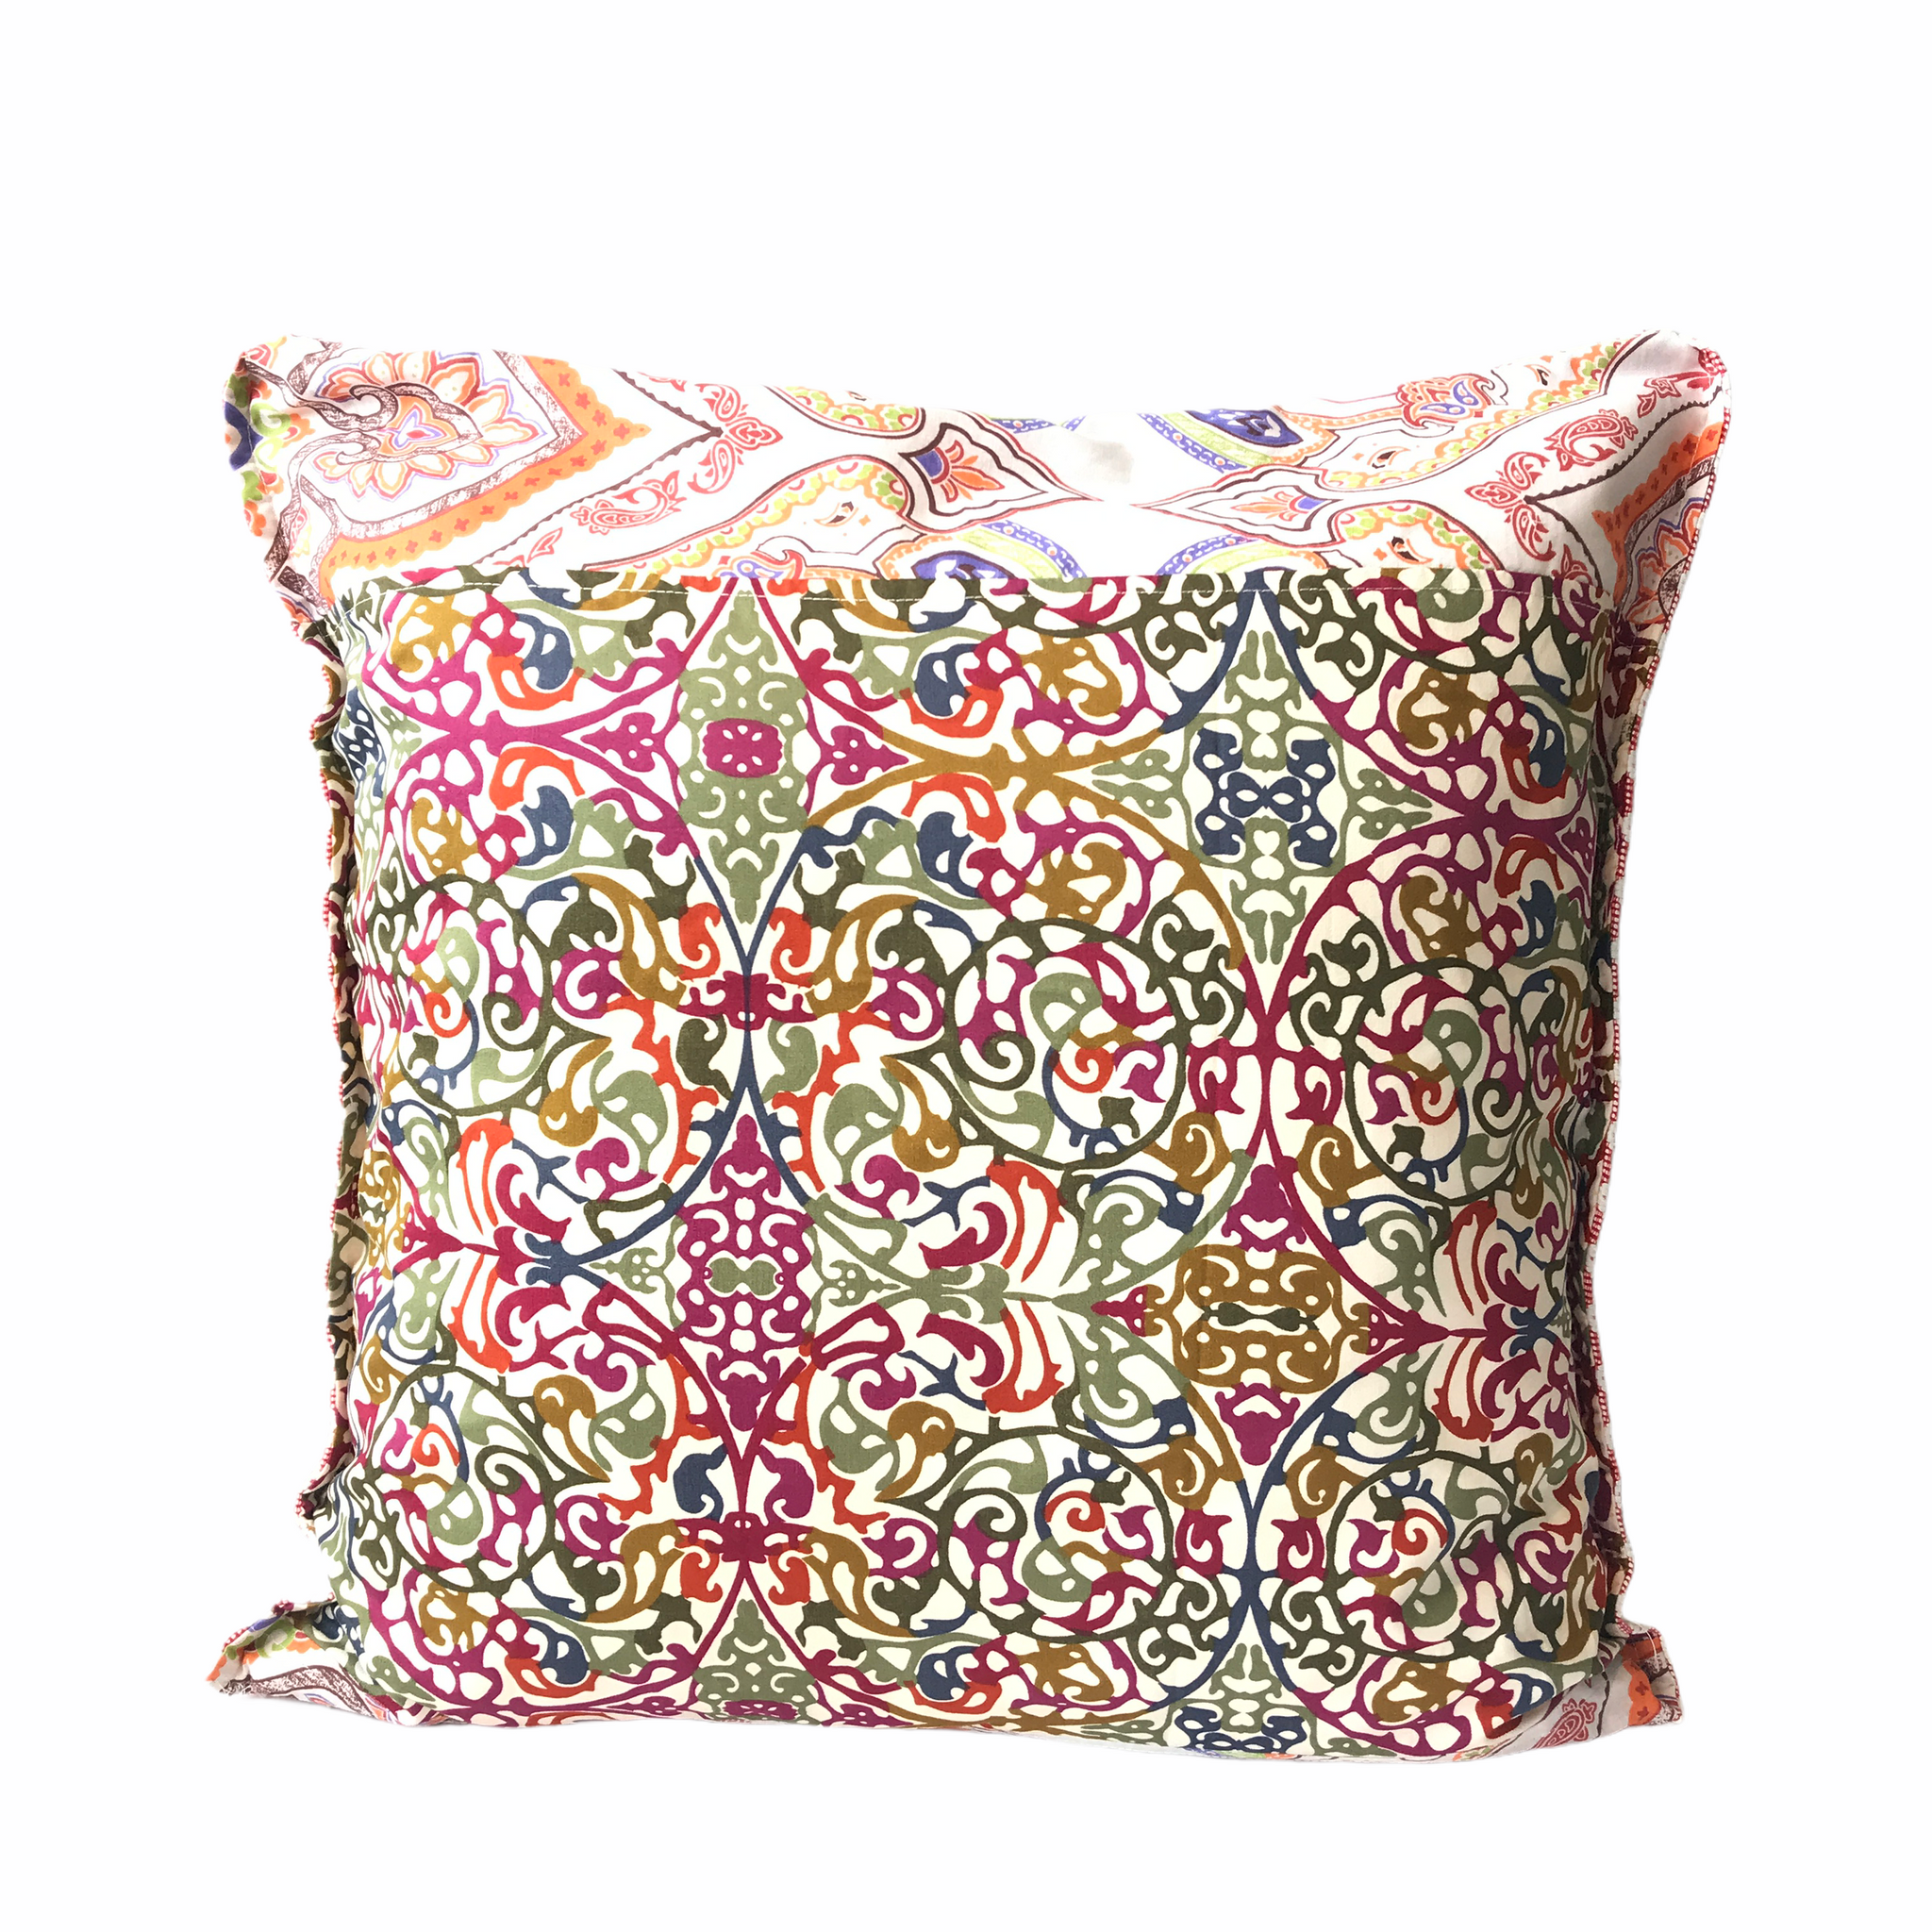 Inabel pillow cover with colourful backing